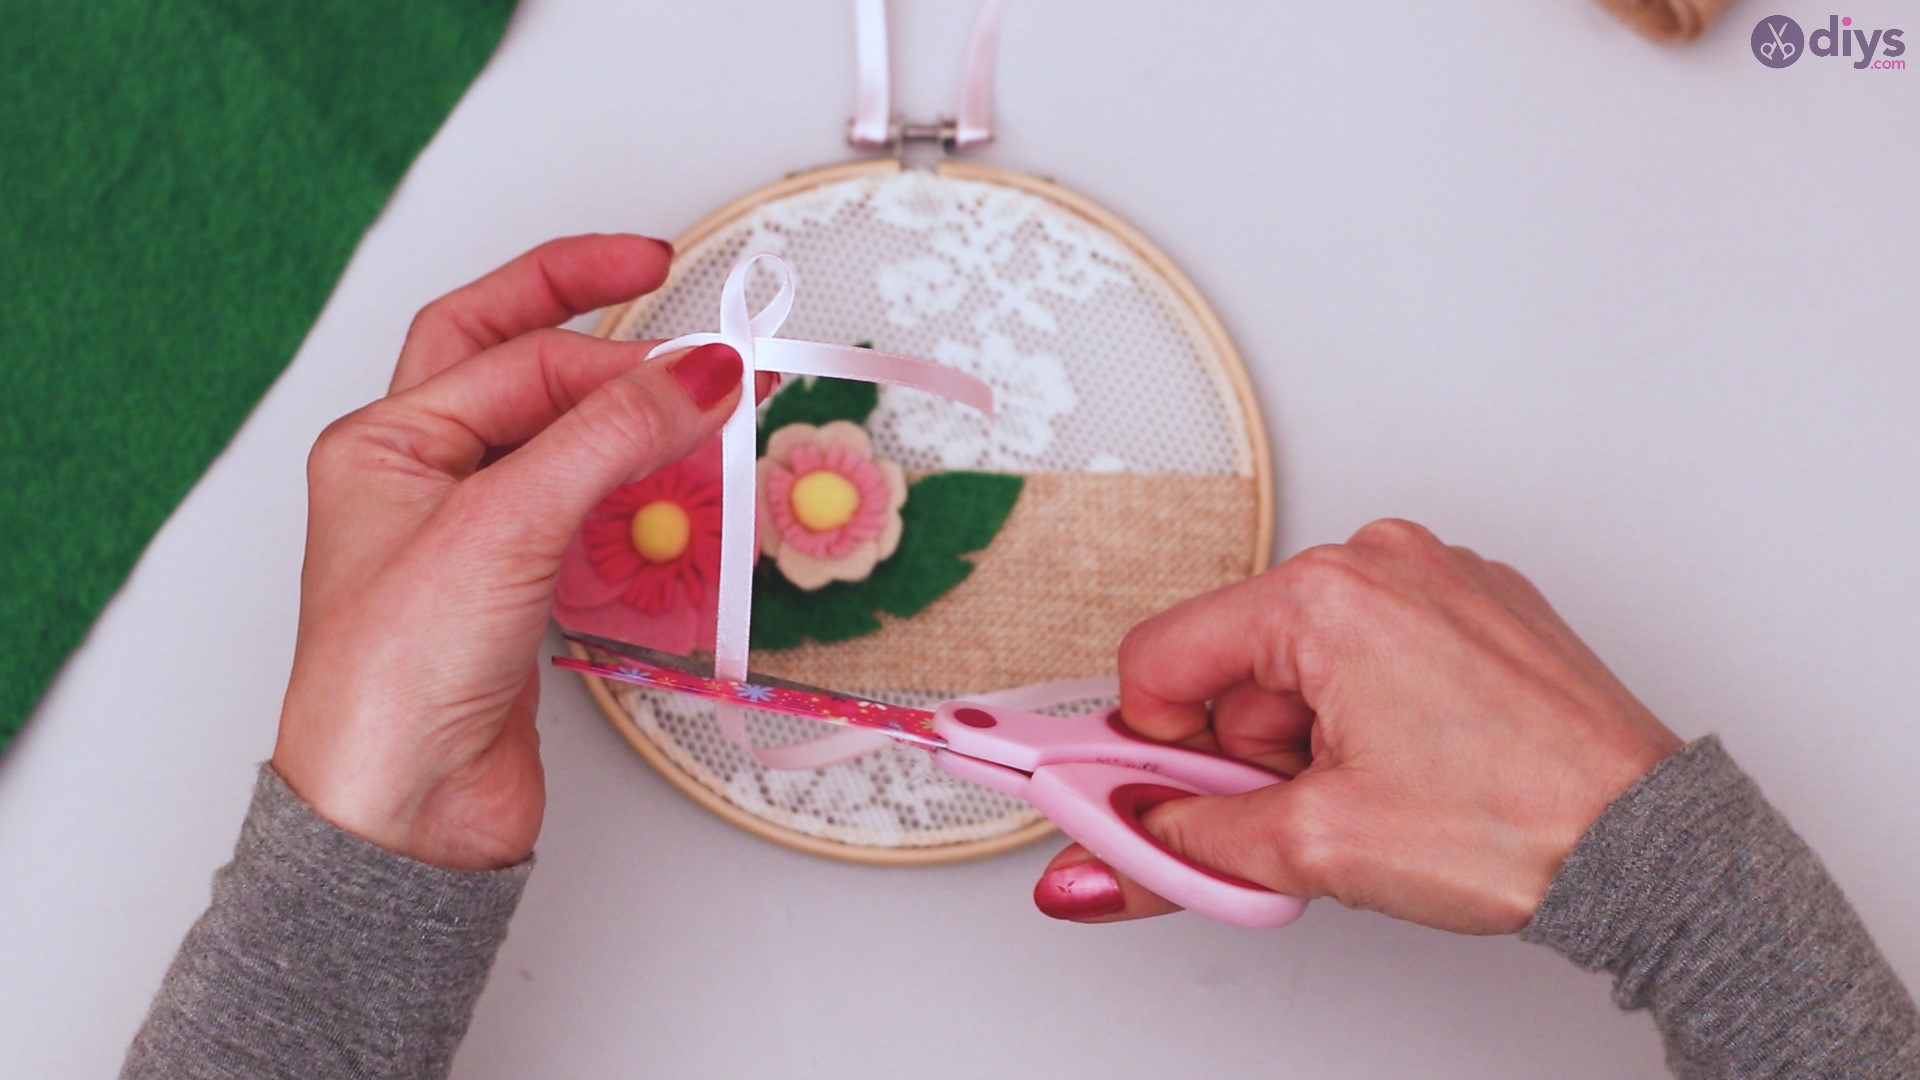 Diy embroidery hoop wall decor tutorial step by step (65)